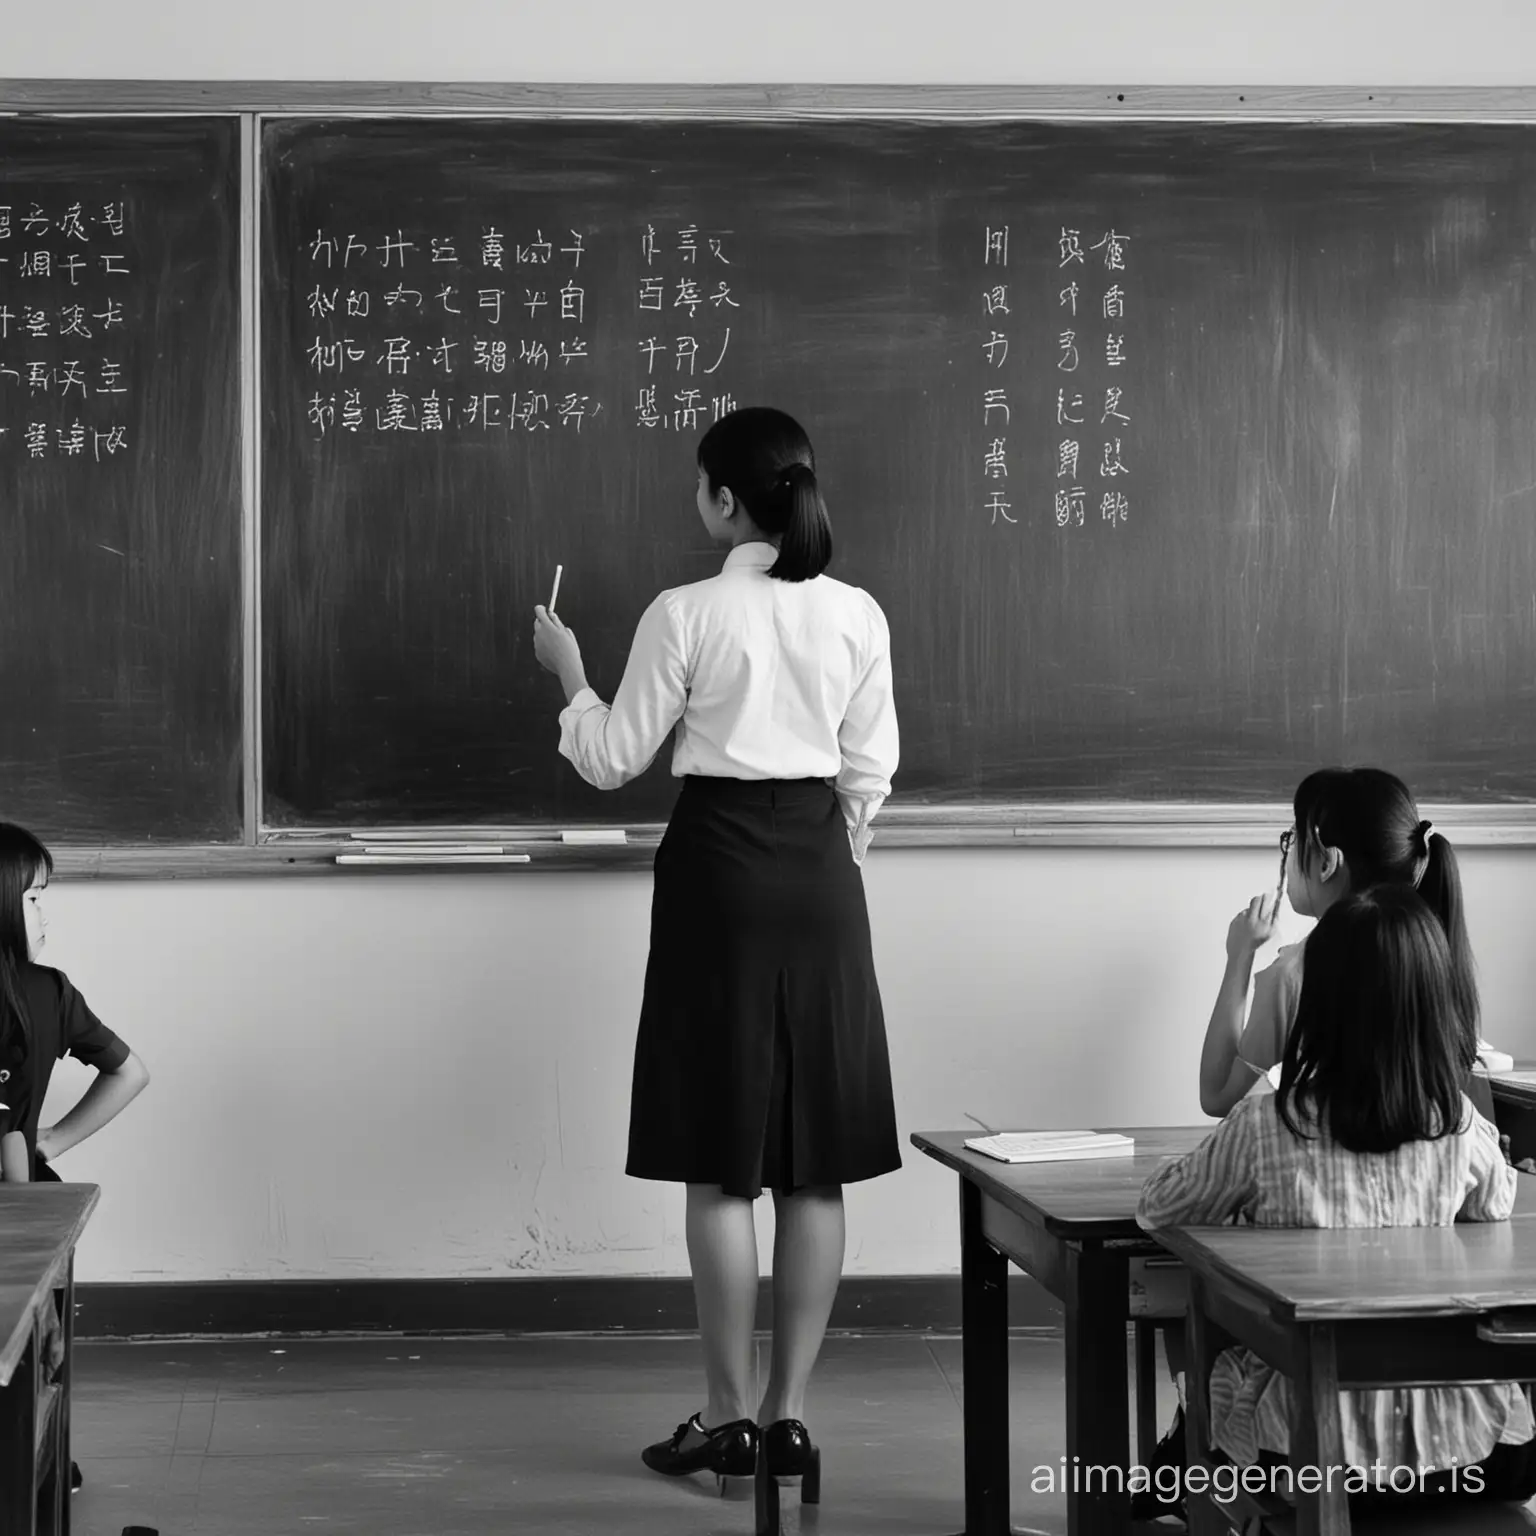 Classroom, the female teacher stands at the podium, with her back to the camera, only showing her silhouette. She holds a white chalk in her right hand and writes on the blackboard, while her left hand naturally hangs down. Several elementary school students are sitting in the classroom, looking at the blackboard, listening to the teacher's lecture. There are several Chinese characters on the blackboard. The blackboard, teacher, and students should maintain perspective relationships.